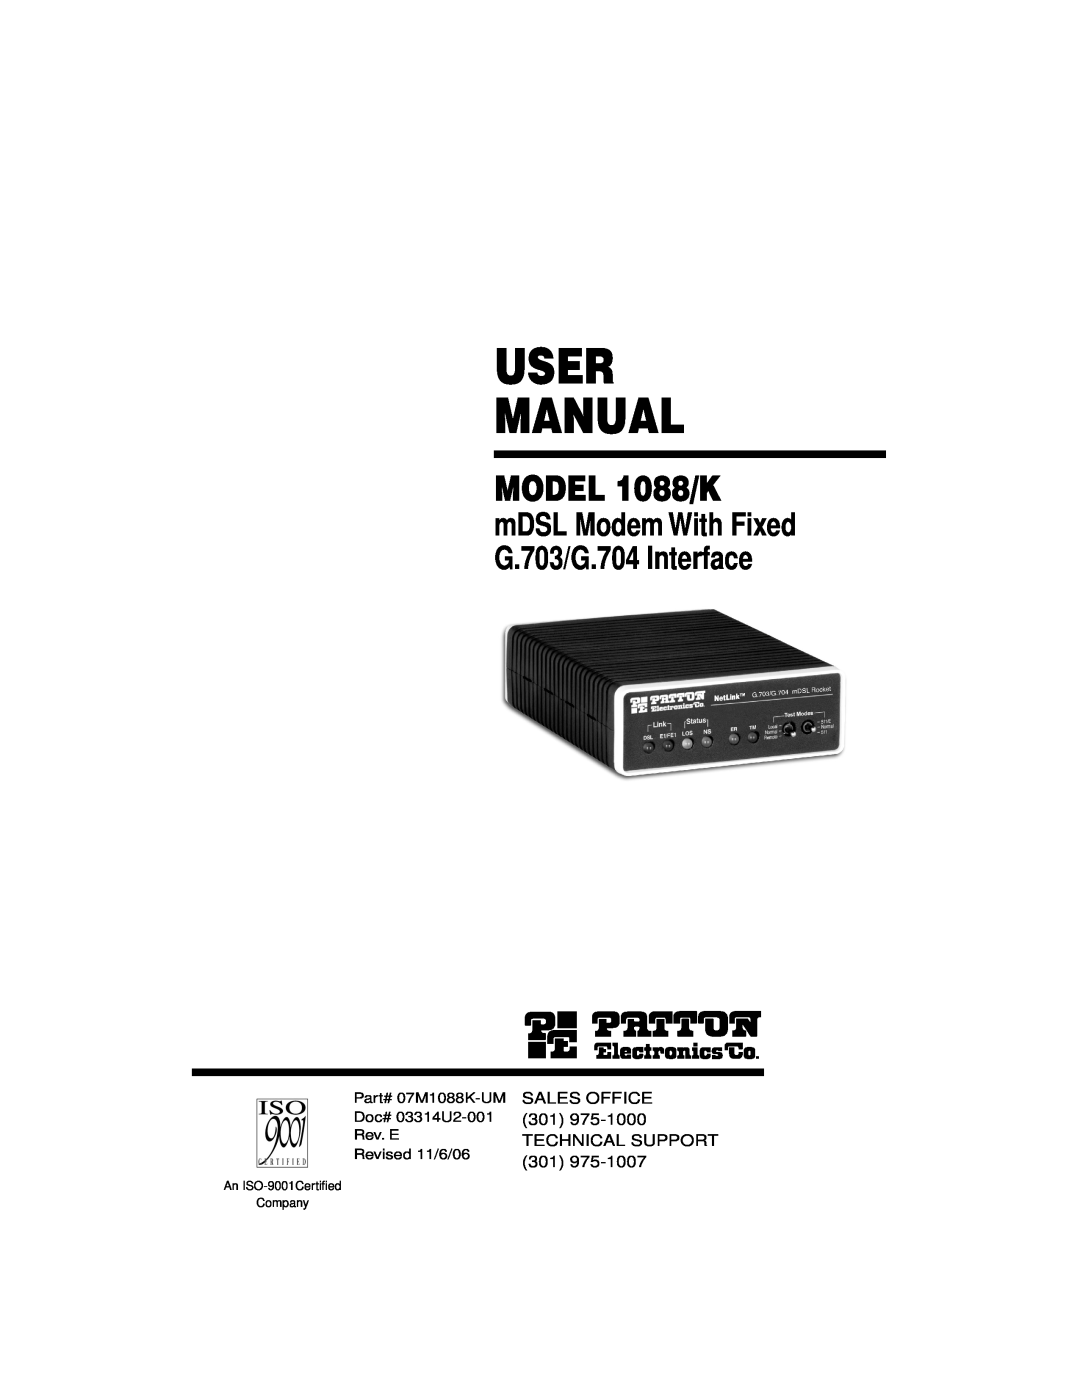 Patton electronic user manual User Manual, MODEL 1088/K, mDSL Modem With Fixed G.703/G.704 Interface 